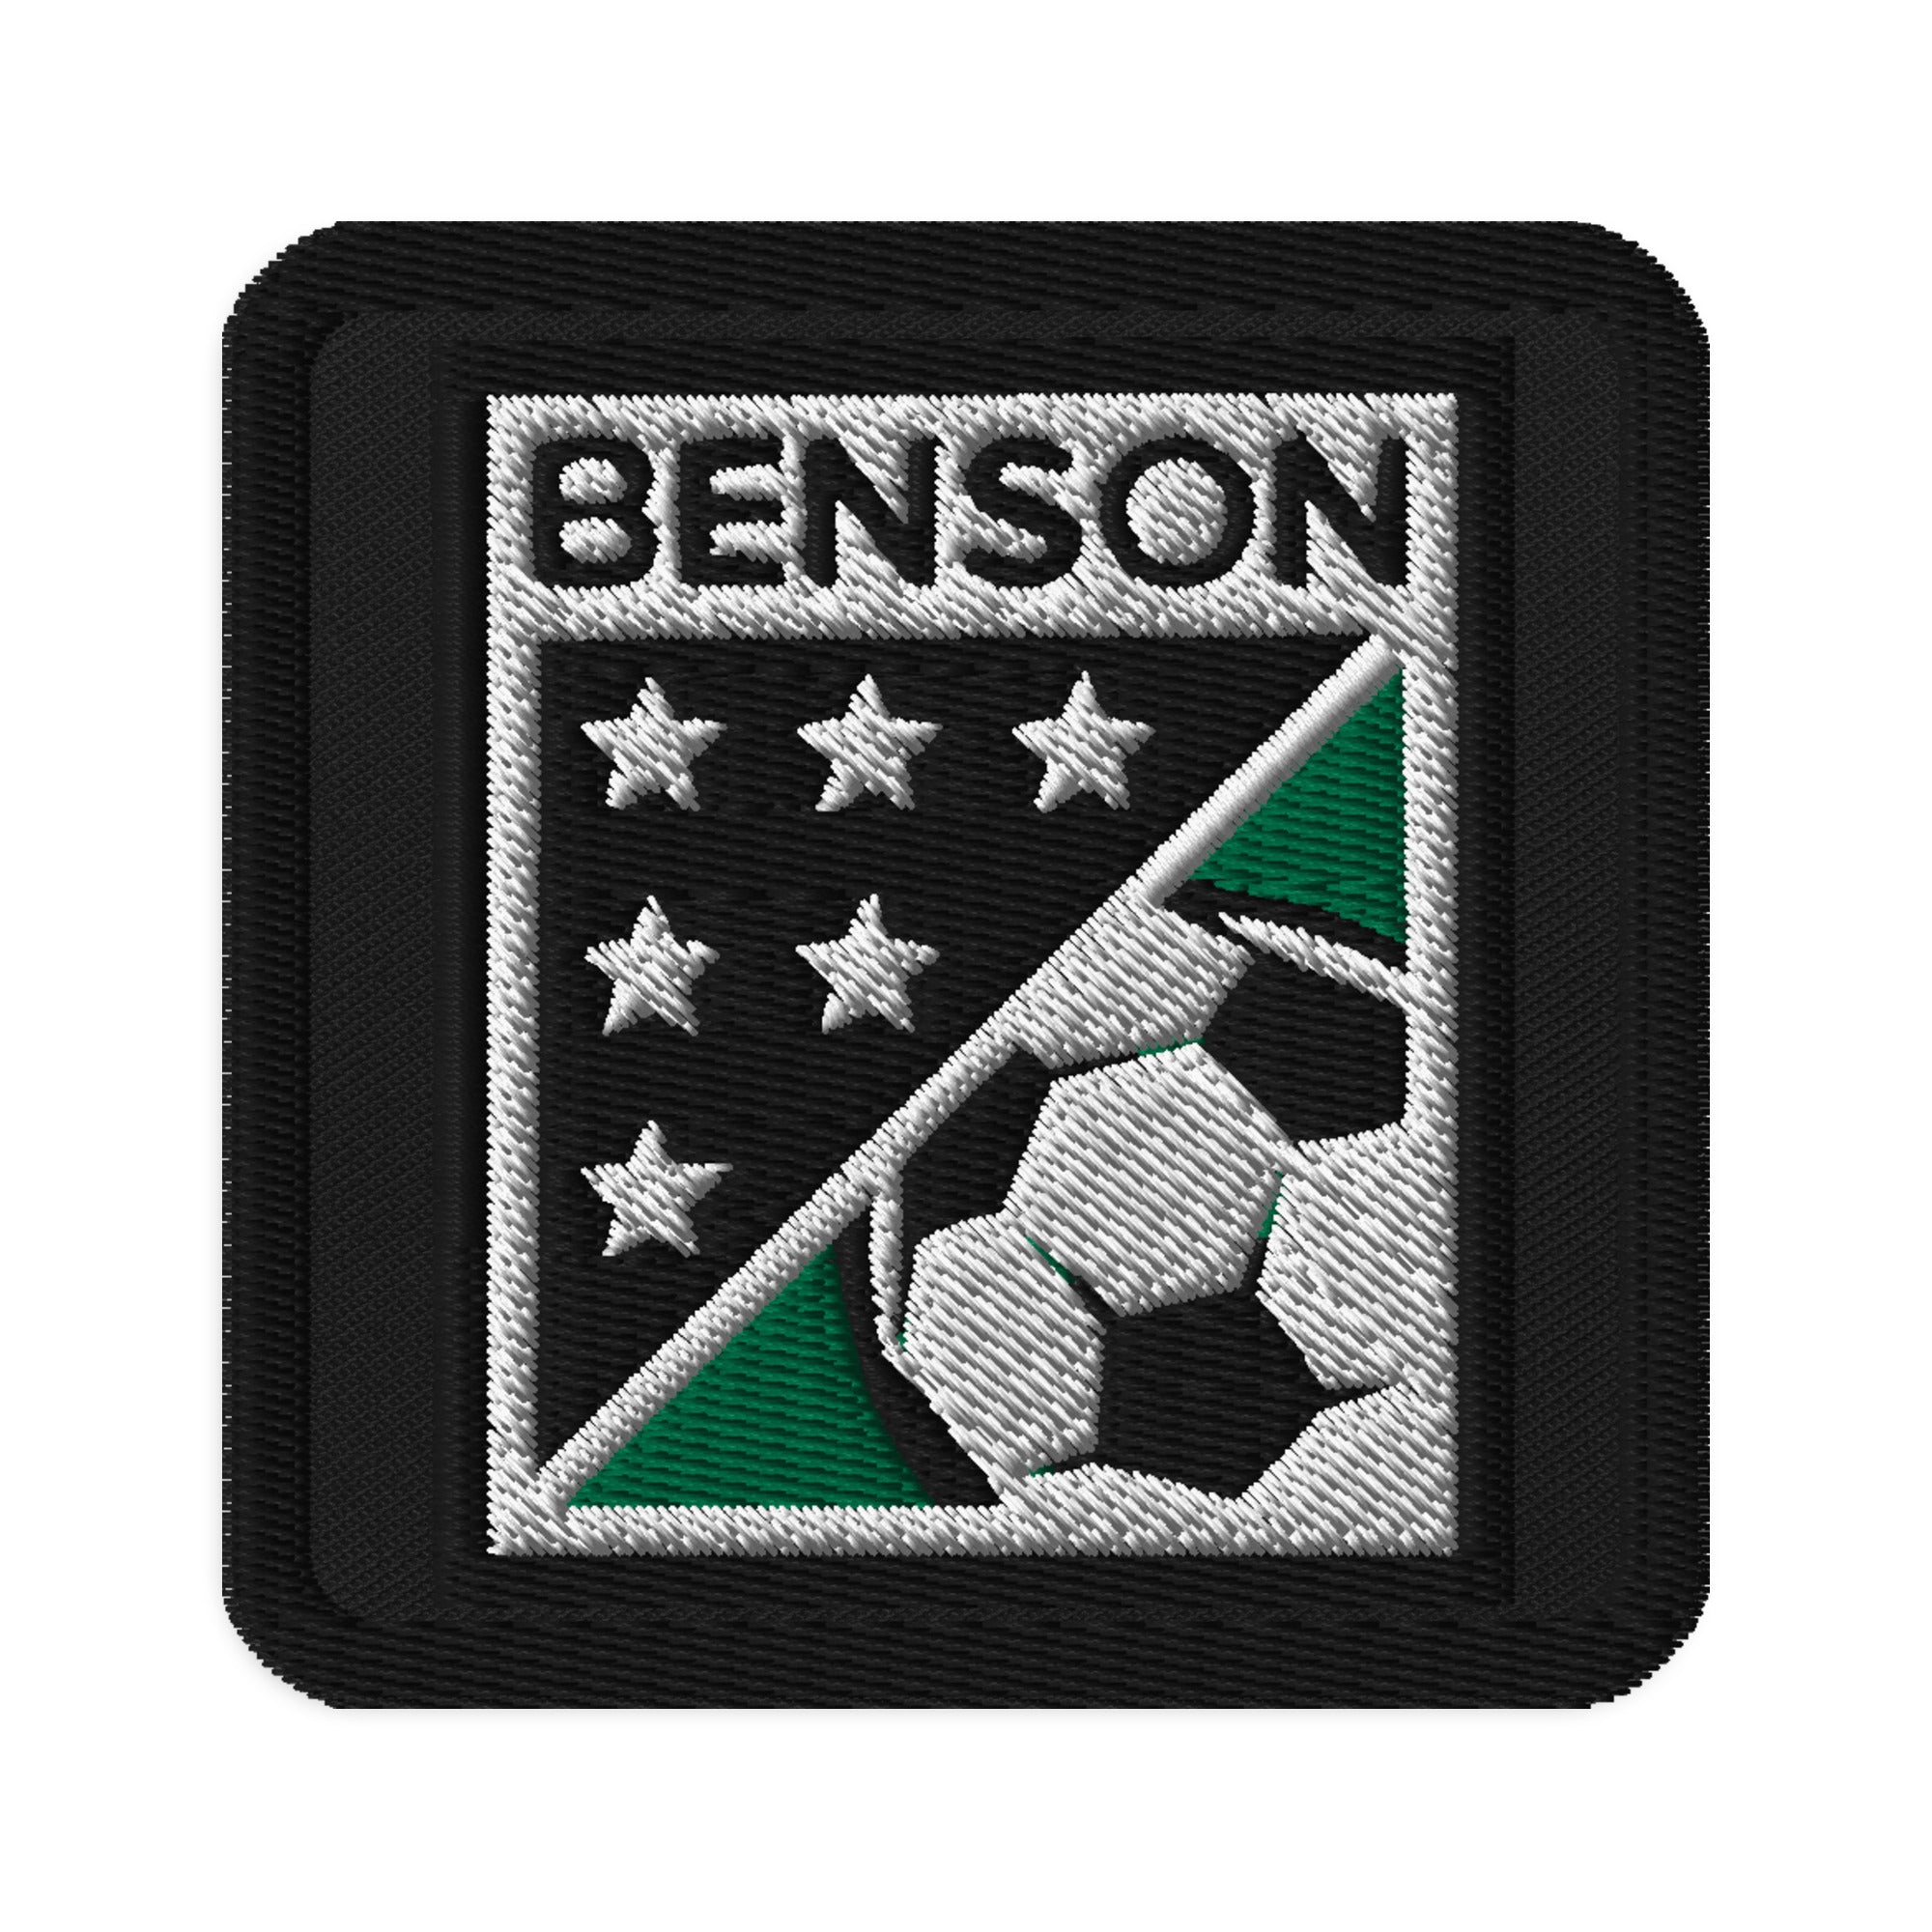 Benson Soccer Embroidered Patches